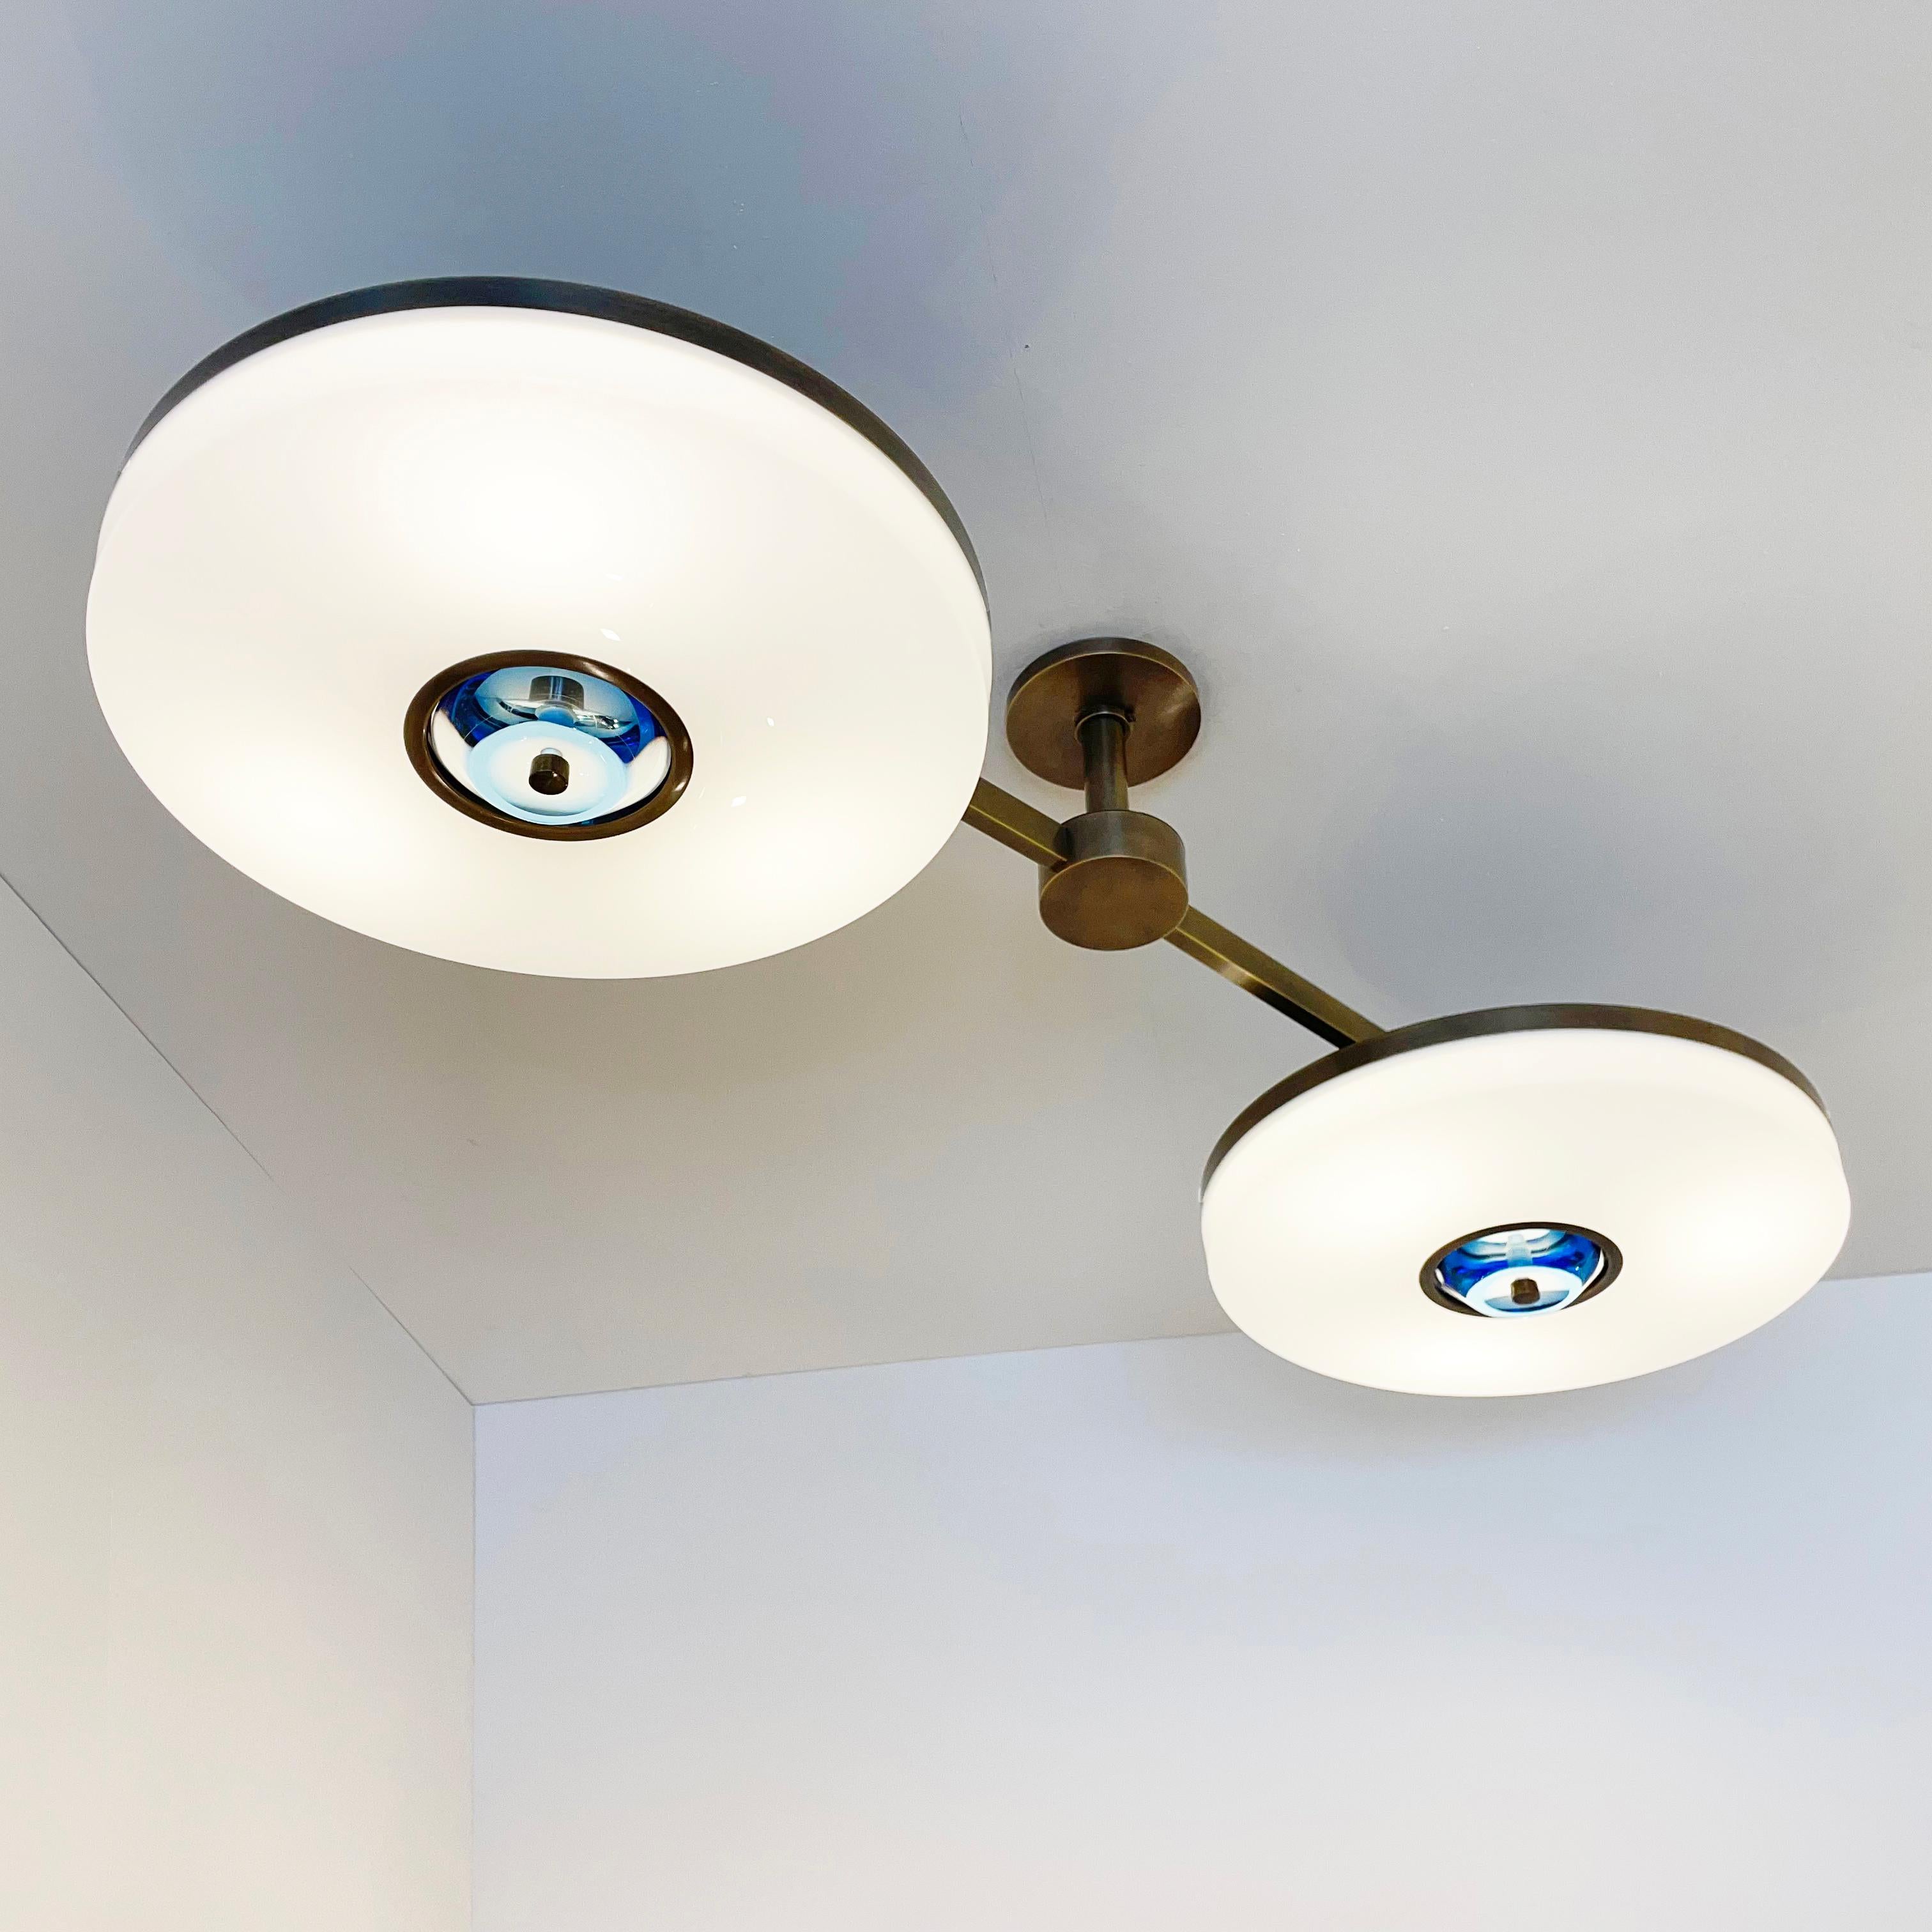 The Iris N.2 ceiling light is designed around two expansive acrylic shades with hand carved glass centers. This versatile fixture can be installed on a stem or as a flush mount. Ideal over kitchen islands, dining tables and other elongated spaces.